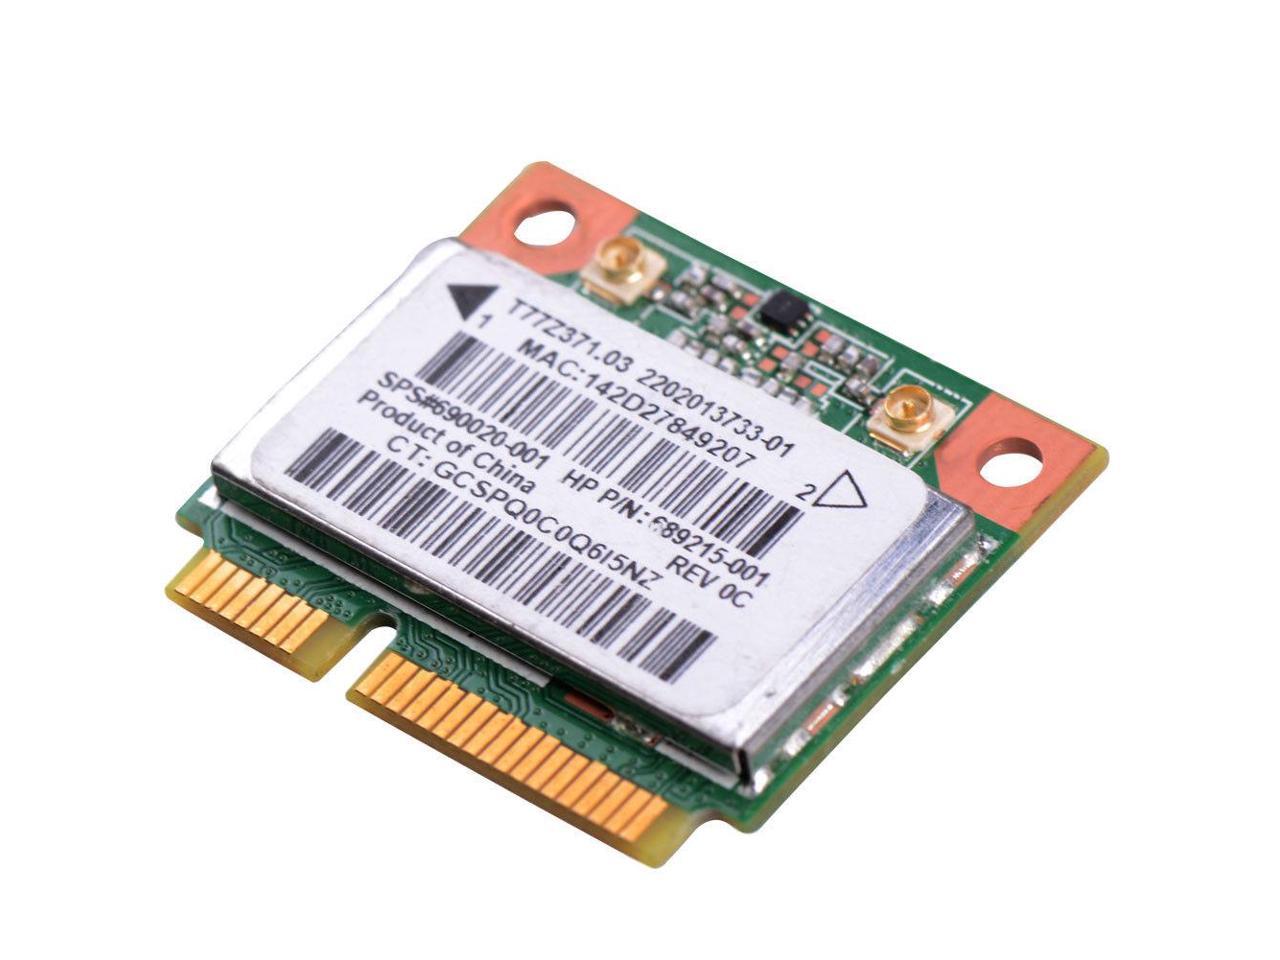 Wi-Fi Wireless Network Card Bluetooth for HP Pavilion G7-2000 Ralink RT3290  MSYG